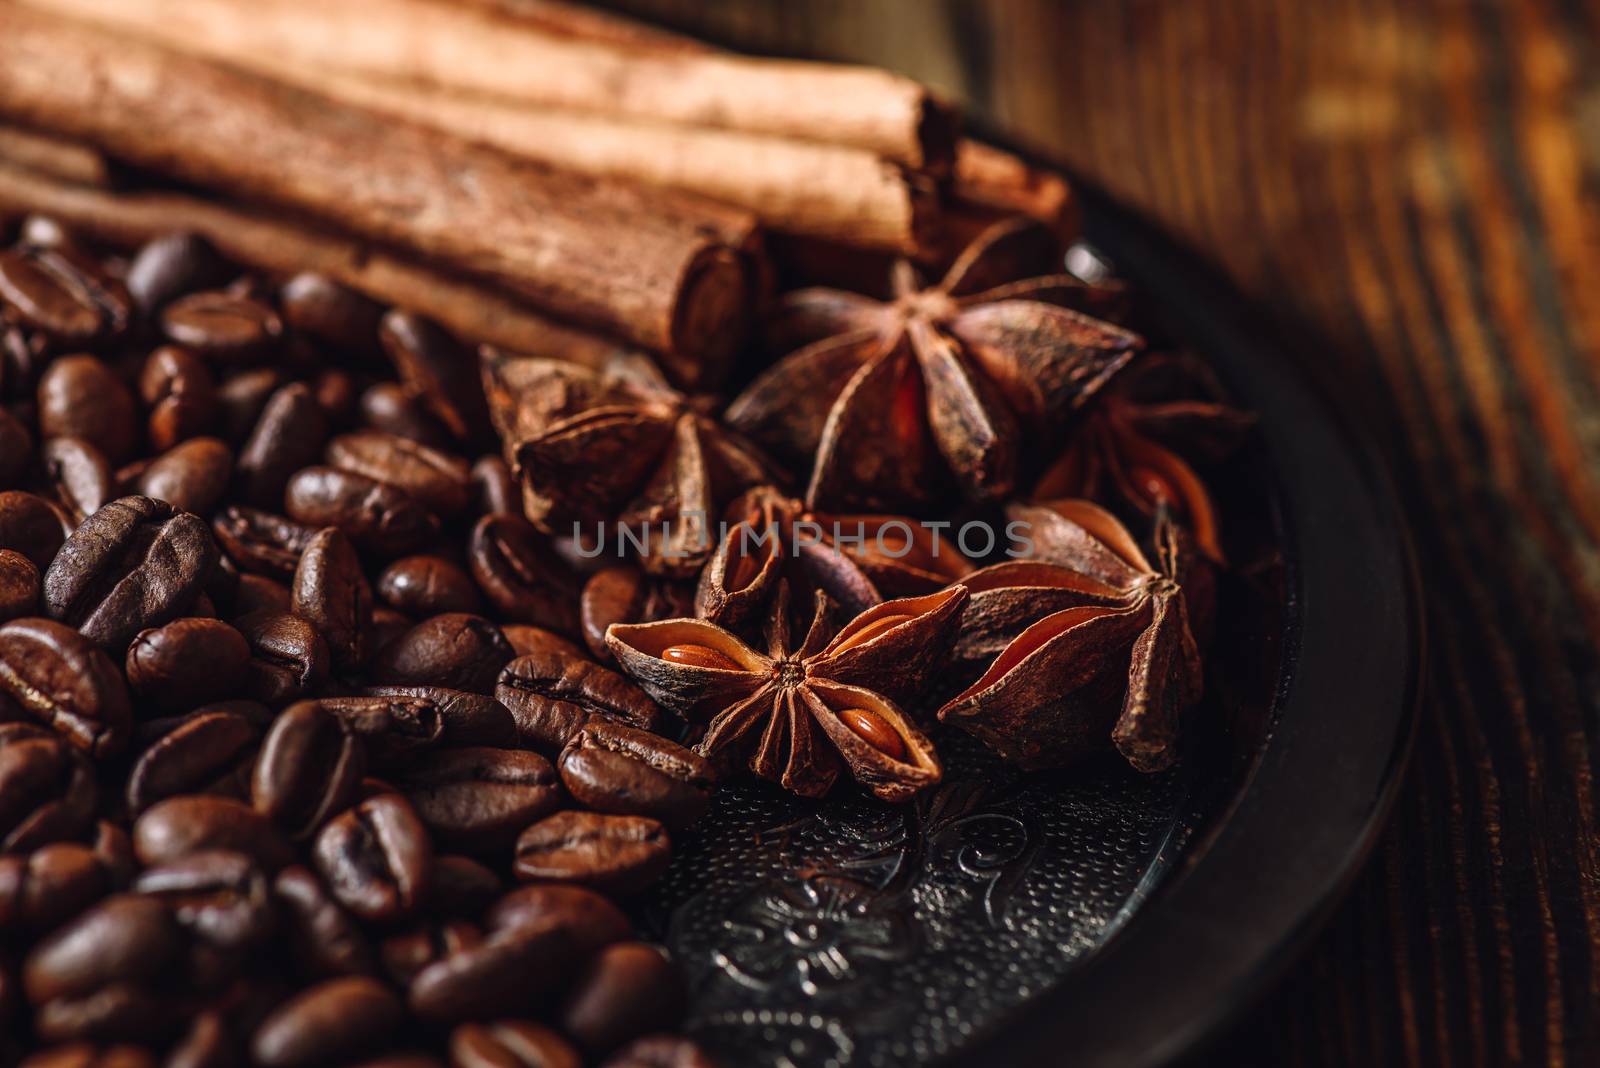 Coffee Beans with Cinnamon and Star Anise on Metal Plate.